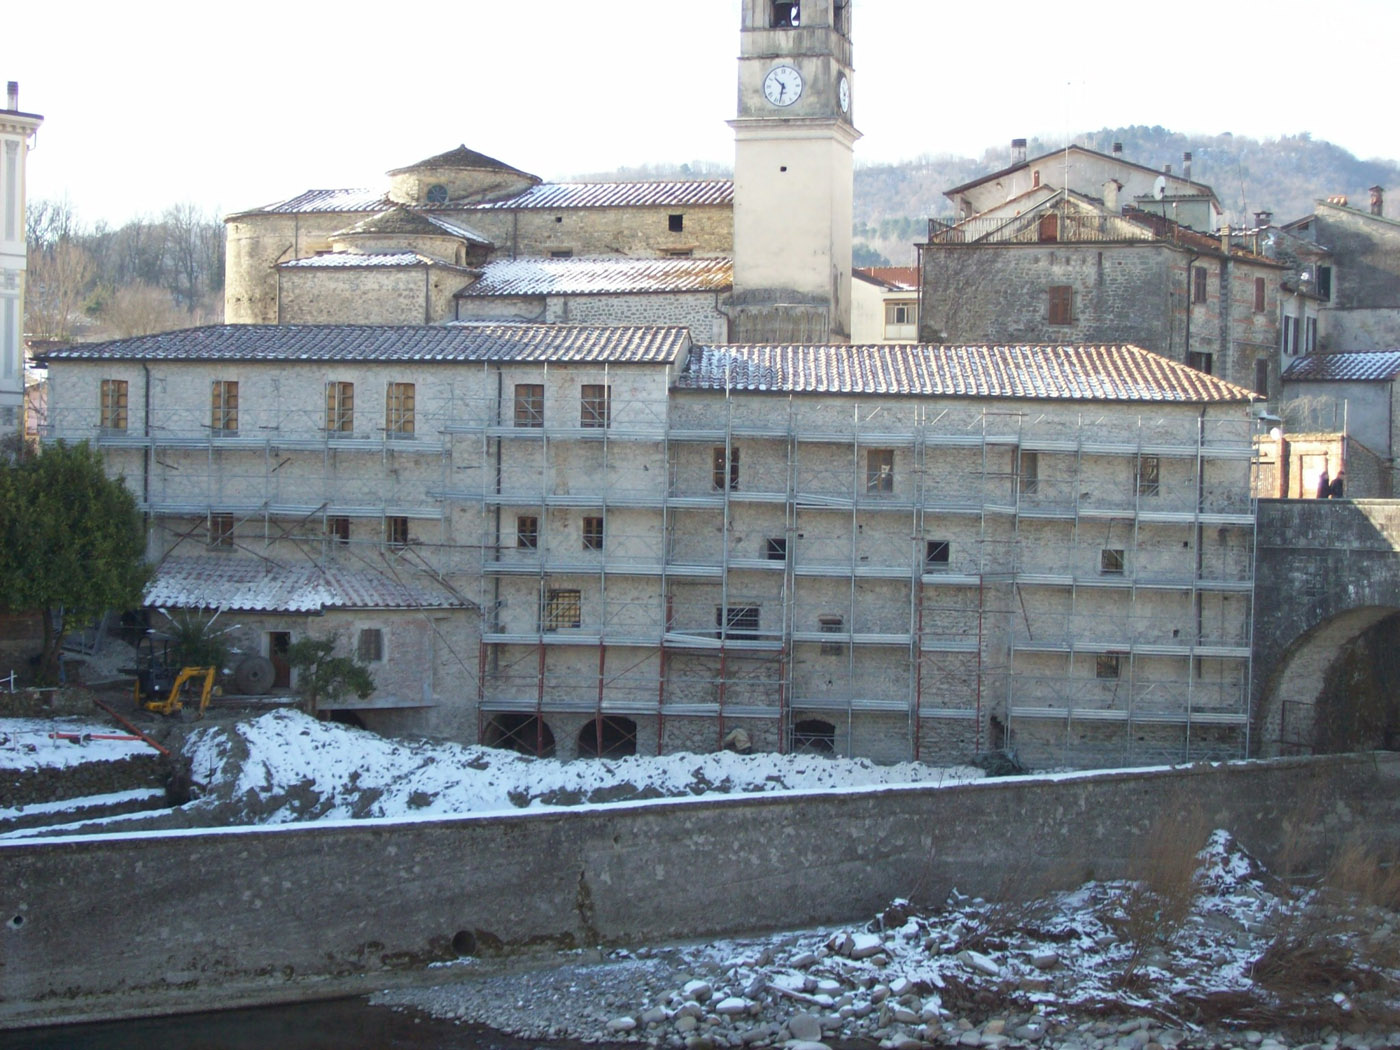 Renovation of the Villafranca building with the FerriTECHNIC structural reinforcement and restoration system